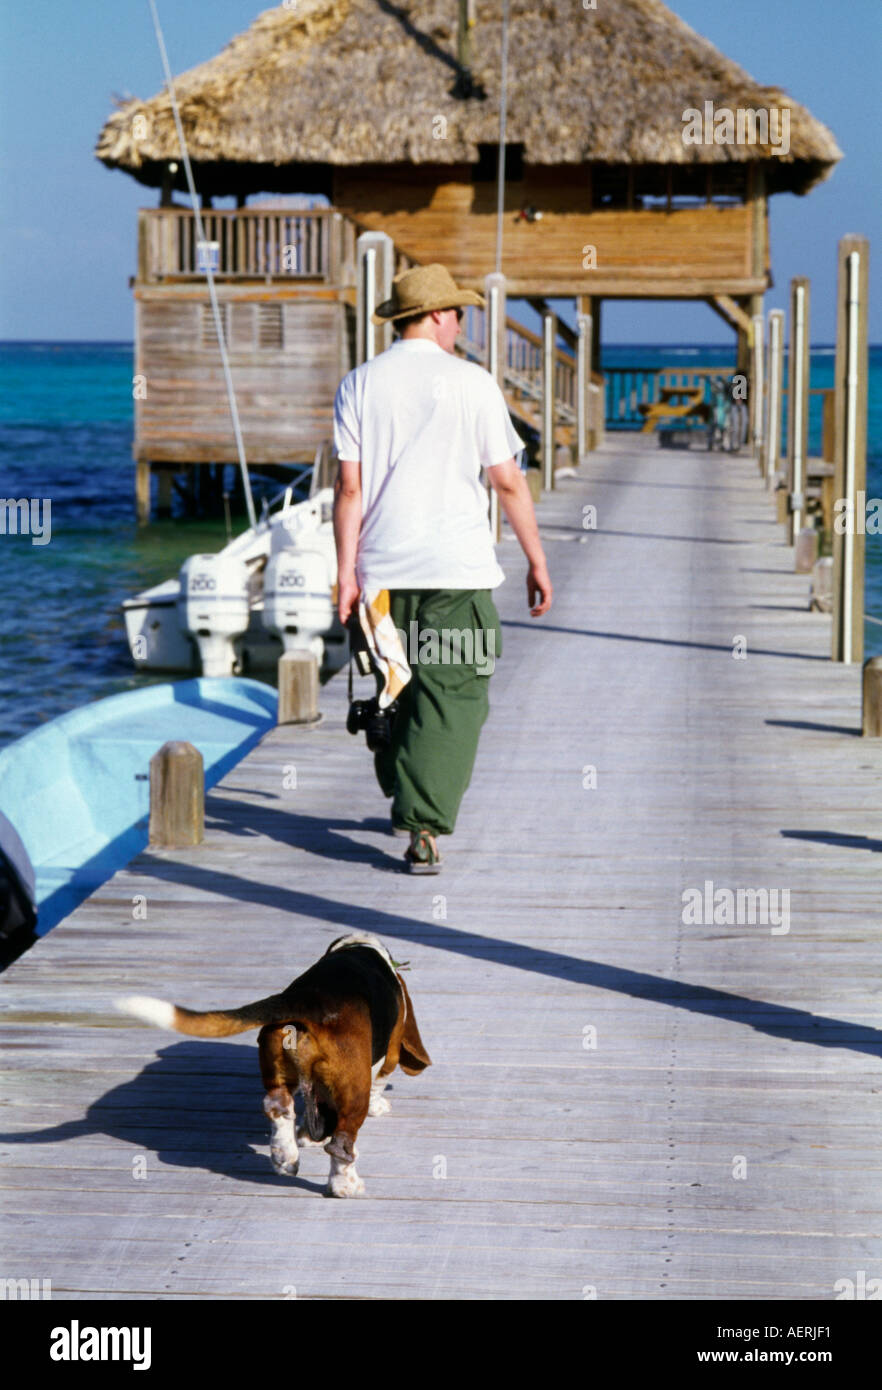 A man walking to a palapa bar in Ambergris, Belize being followed by a basset hound dog. Stock Photo